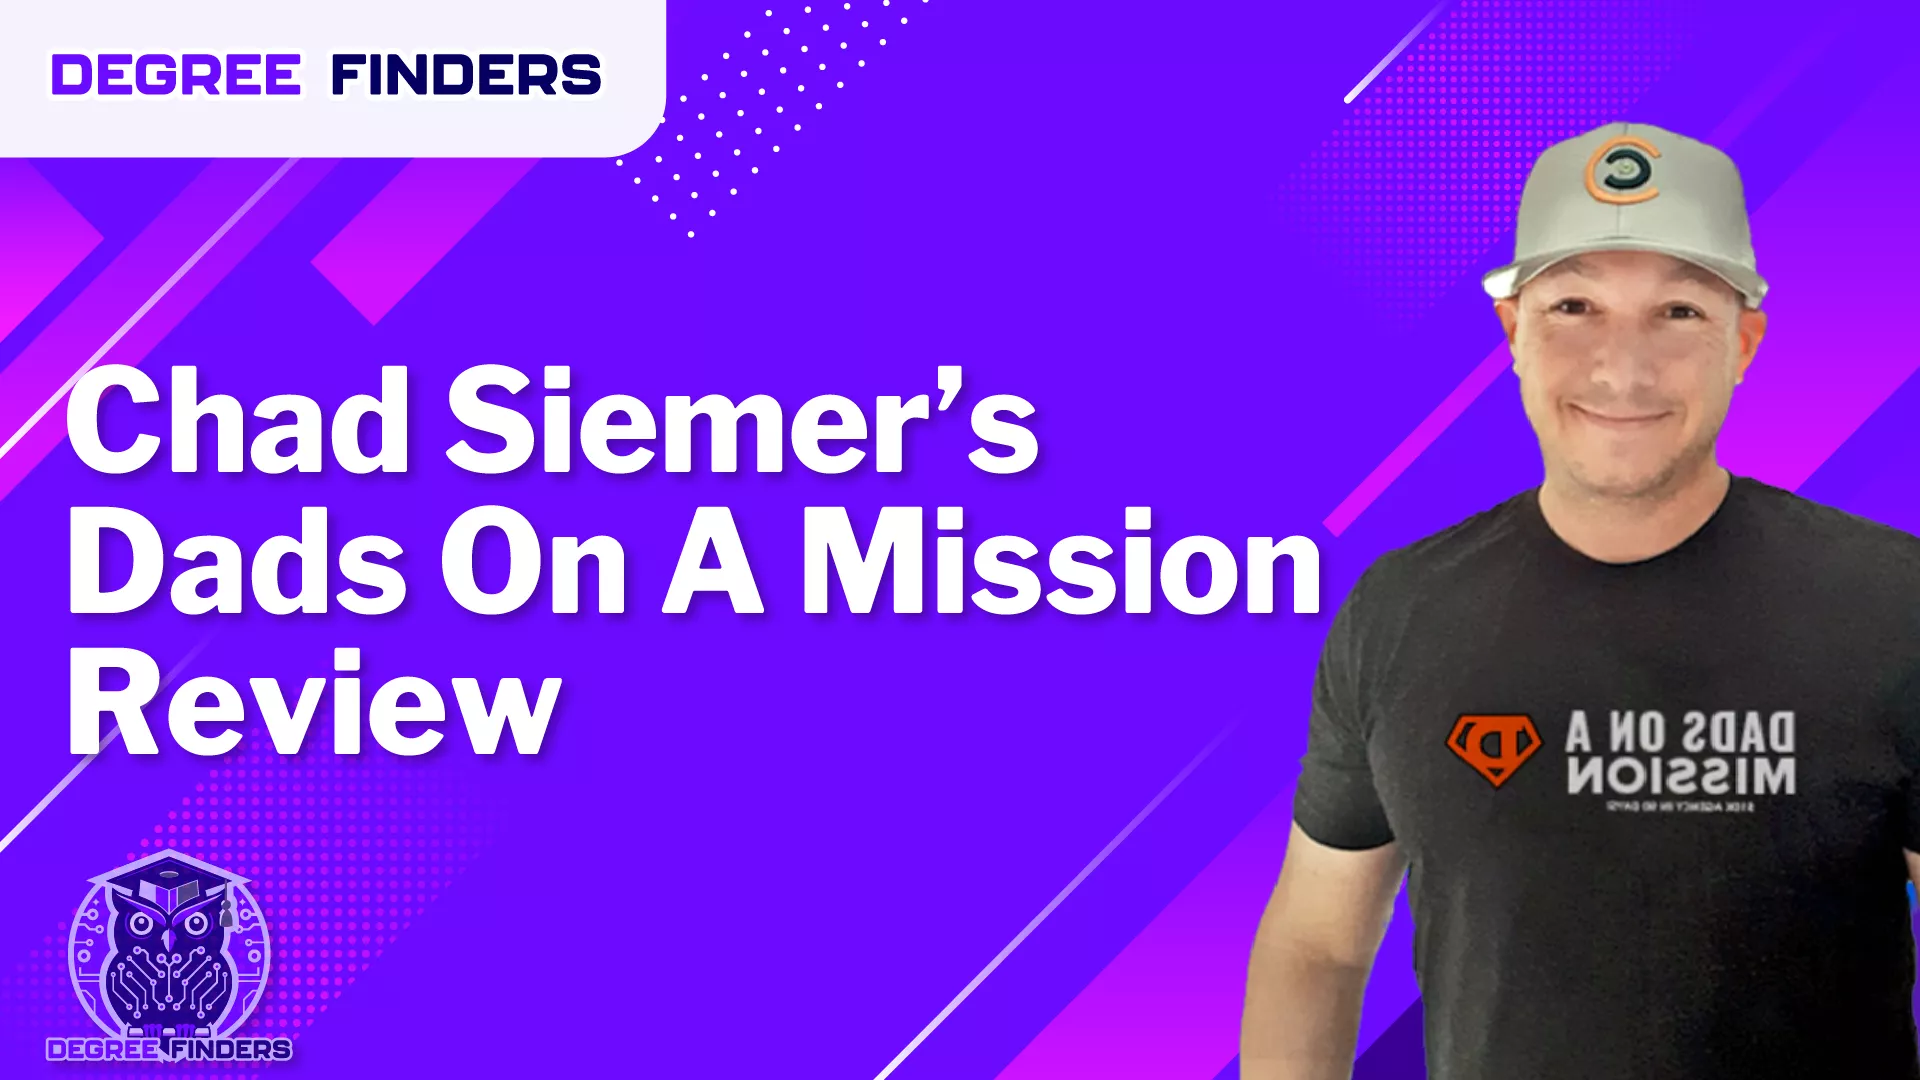 Chad Siemer’s Dads On A Mission Review -01